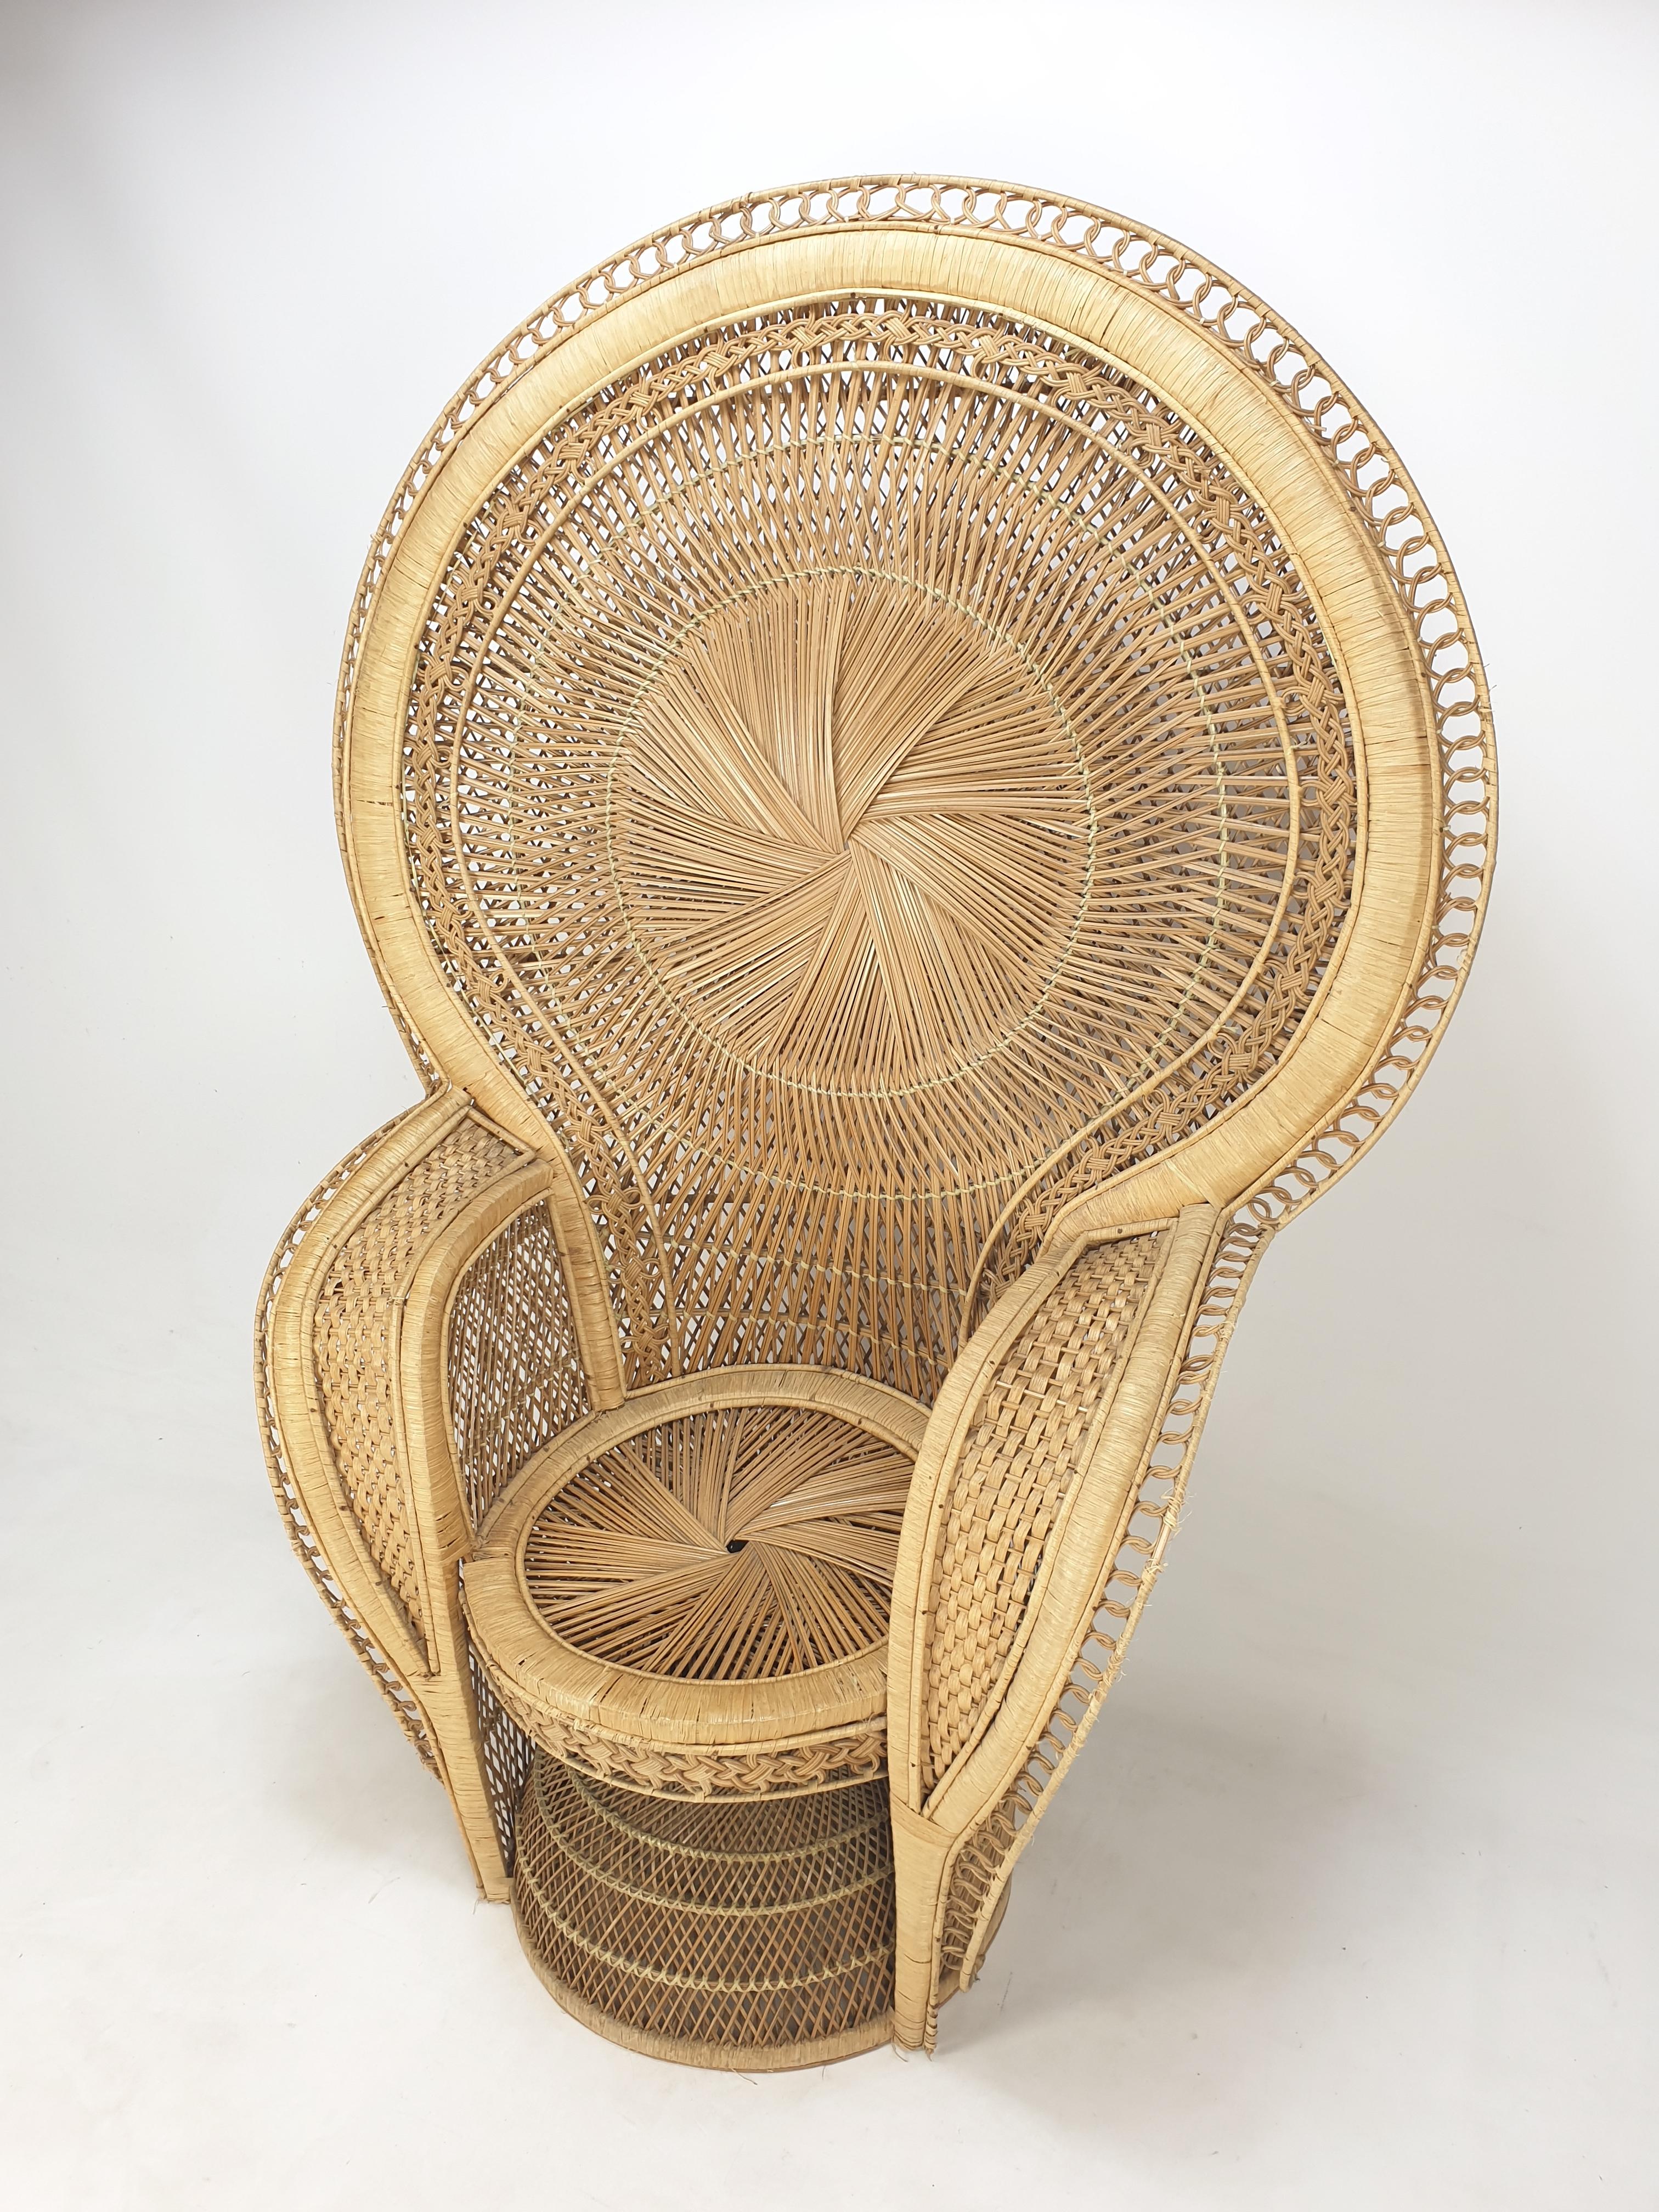 Mid-Century Modern Midcentury Emmanuelle or Peacock Rattan and Wicker Chair, Italy 1960s For Sale